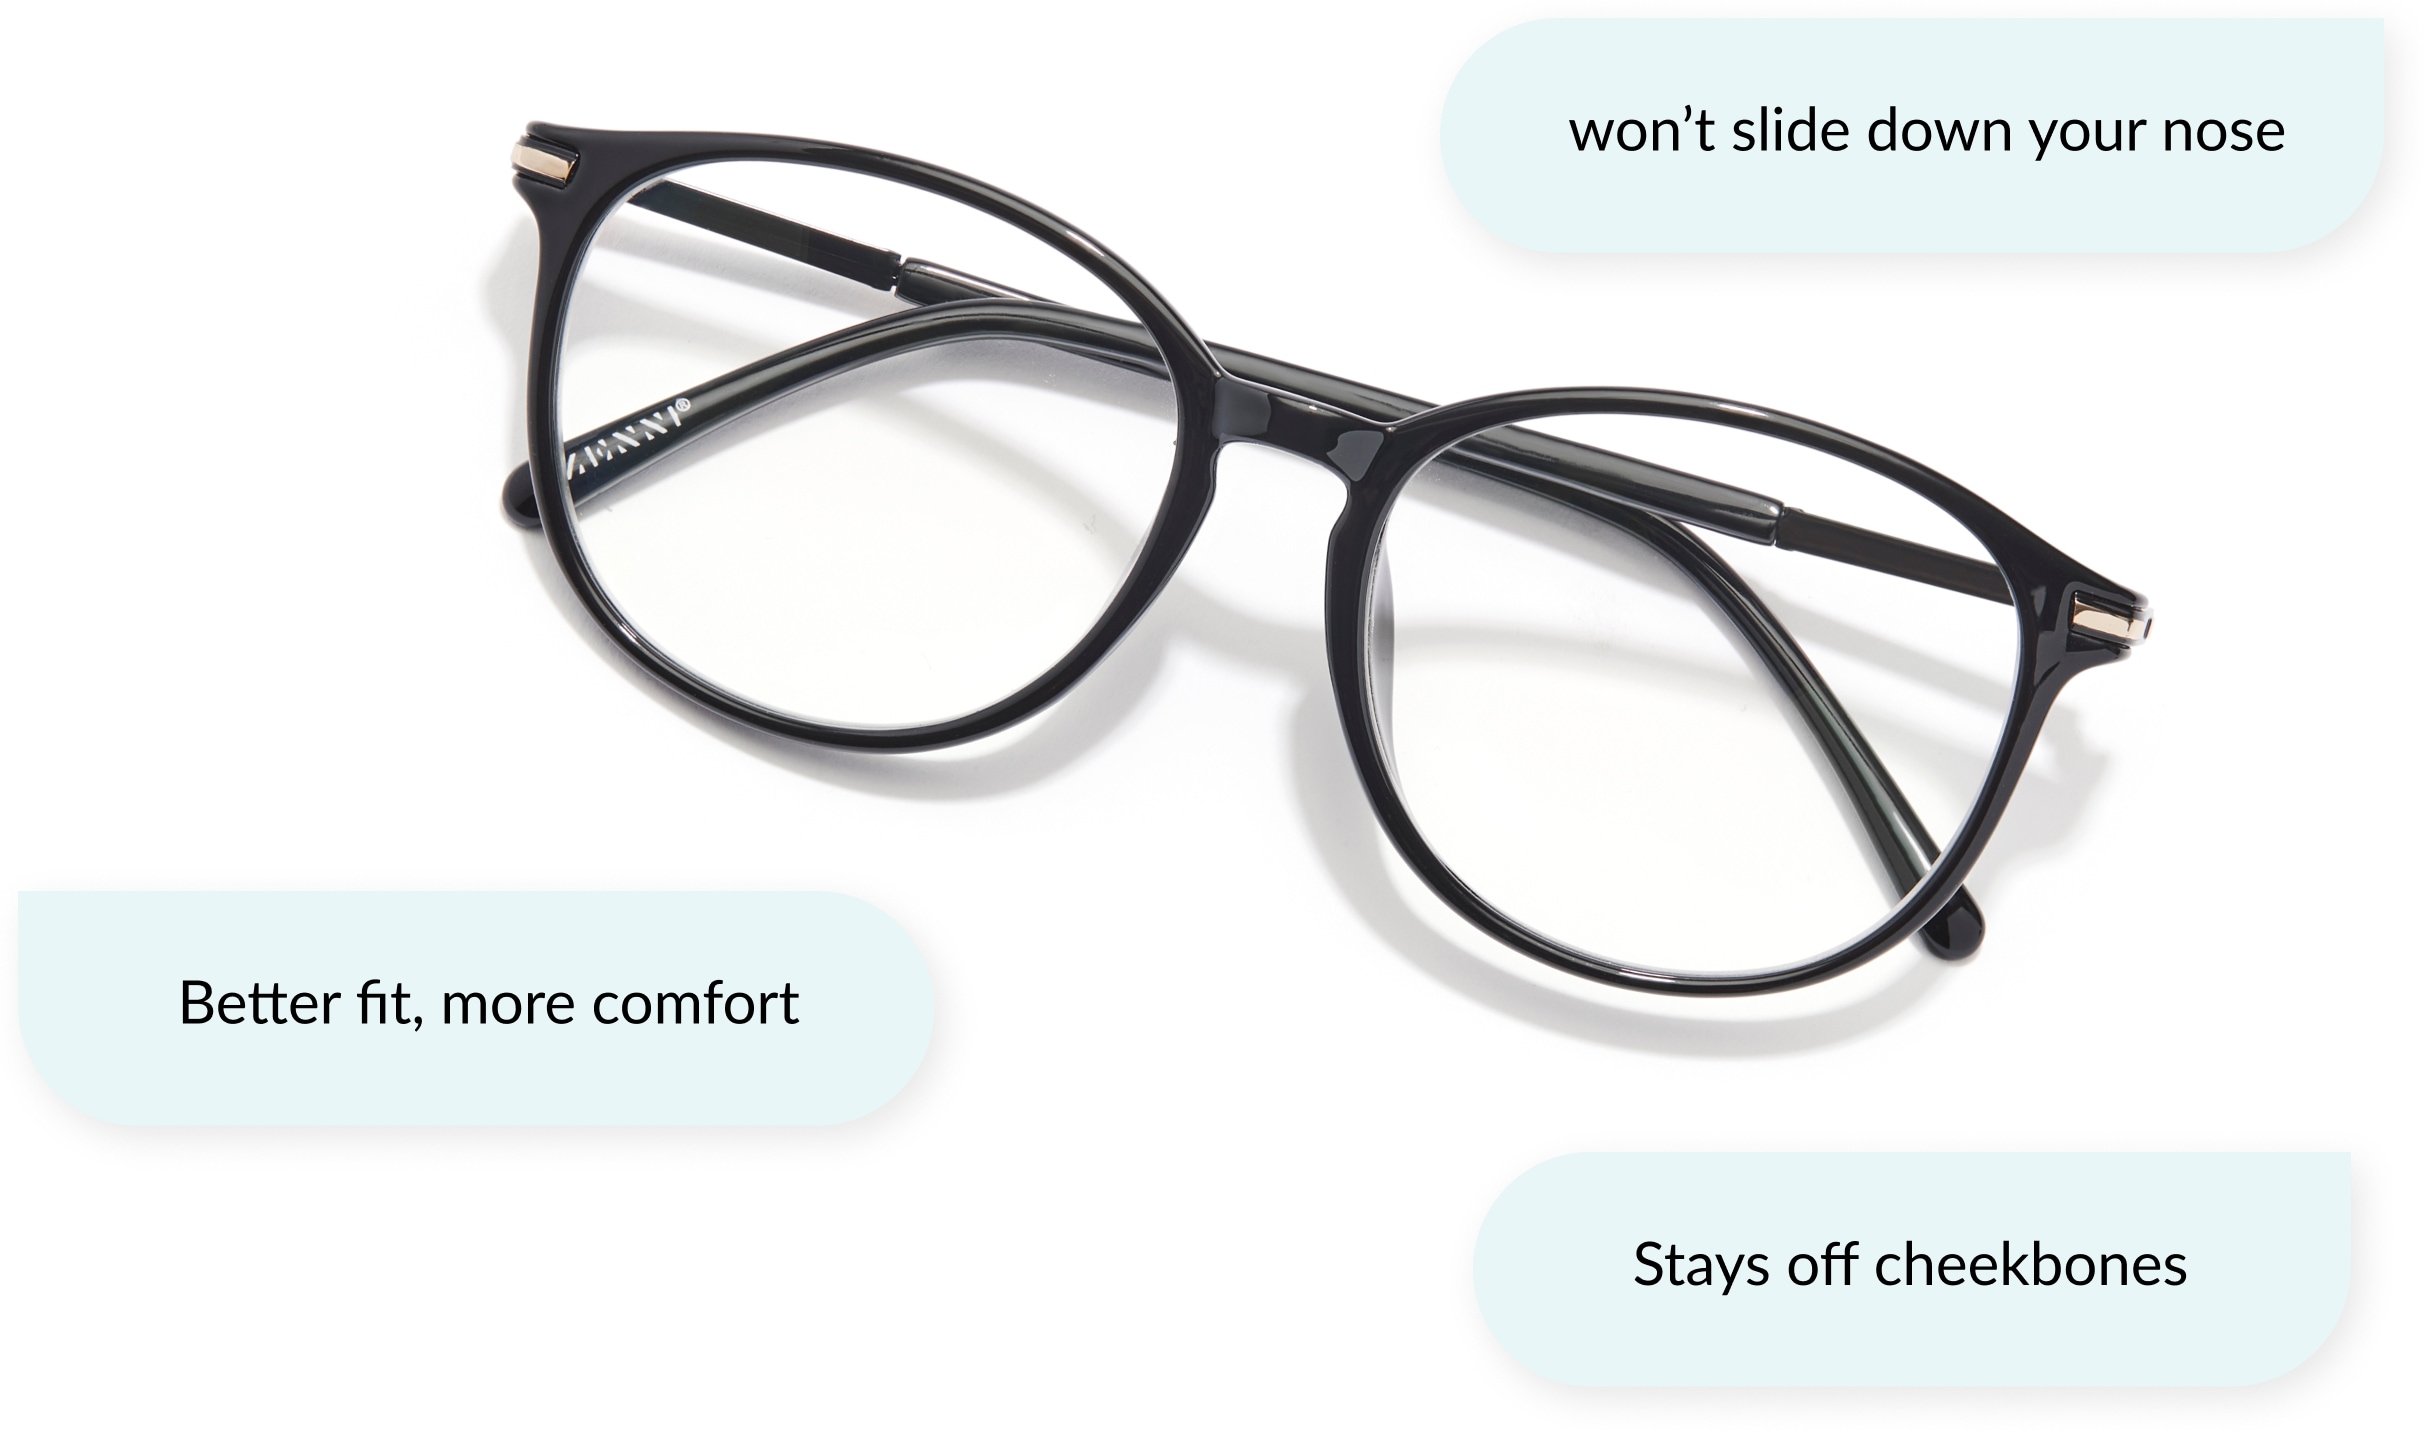 Image of a pair of Universal Fit zenni glasses against a white background. Around the glasses are text bubbles that say 'won't slide down your nose' 'better fit, more comfort' and 'stays off cheekbones.'